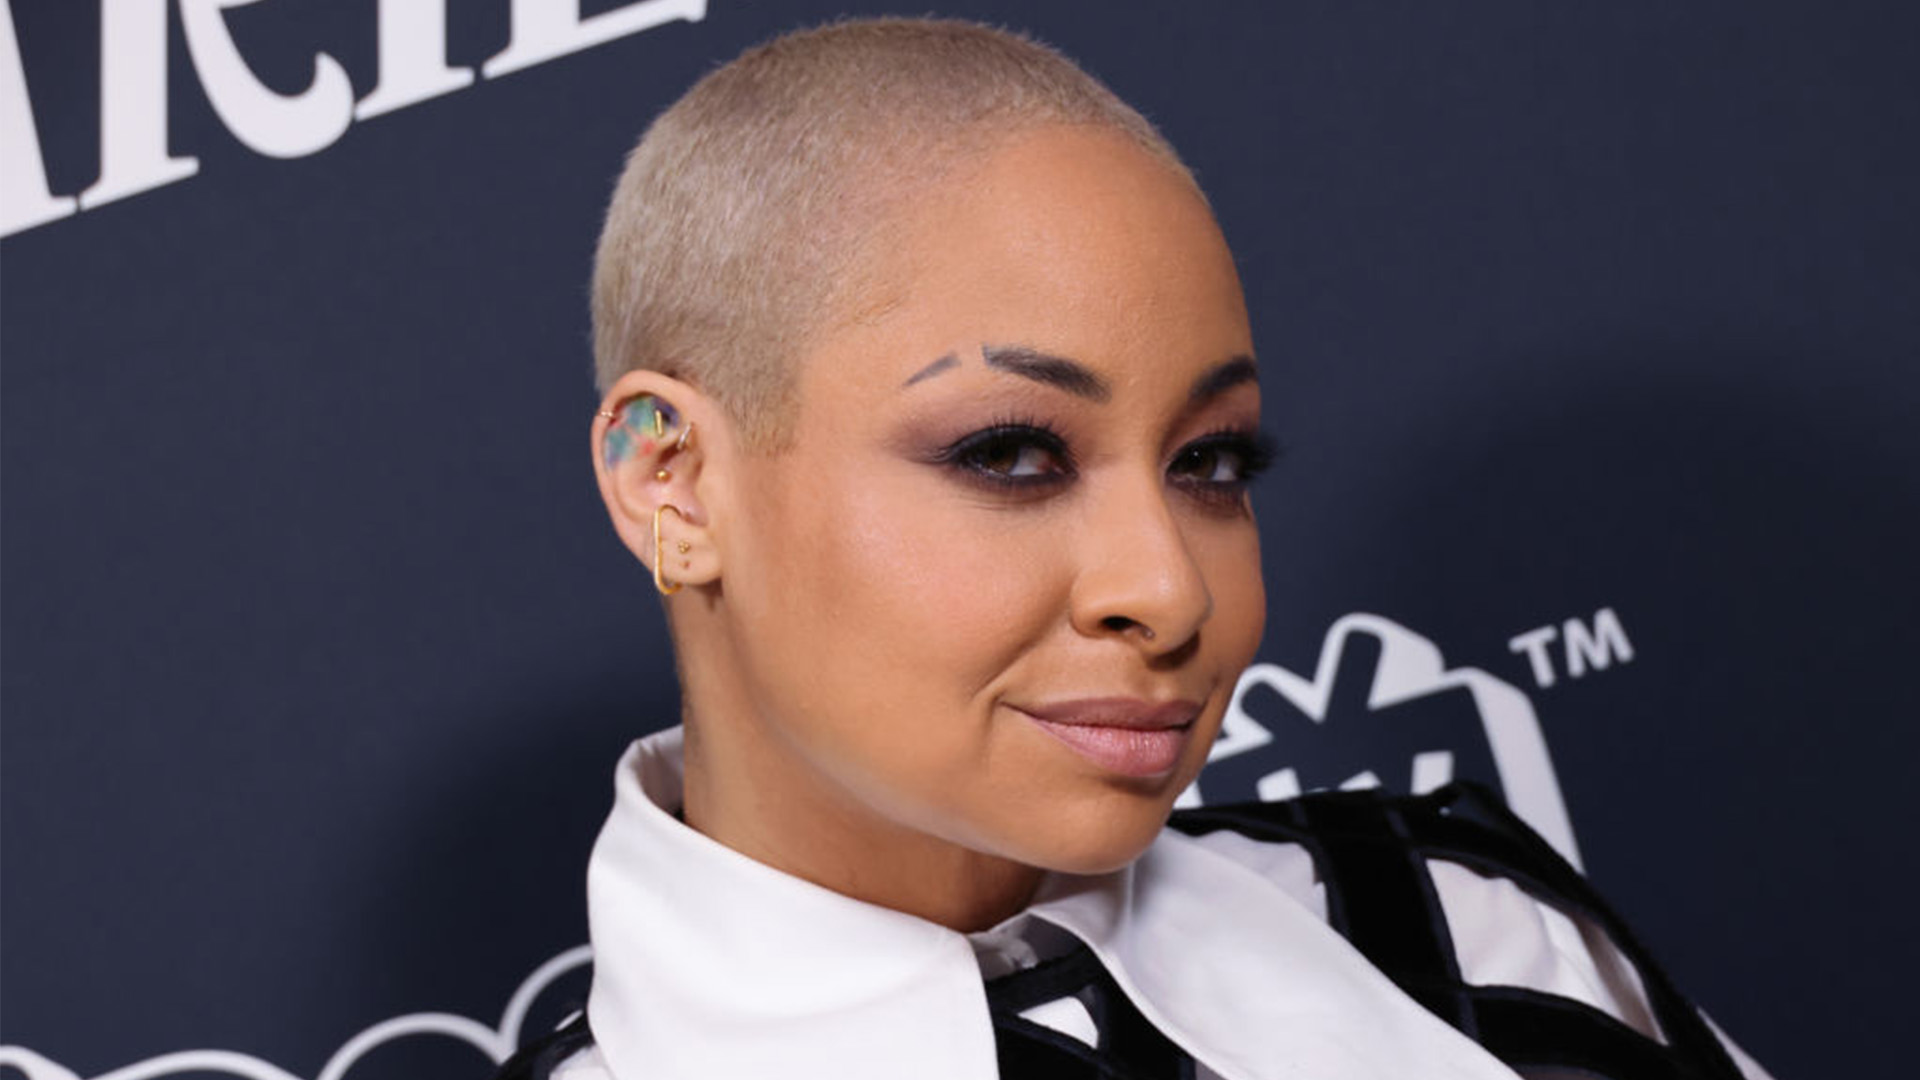 Raven-Symoné Made Her 'Cosby Show' Debut At Age Three, But She's Never Spent The Earnings